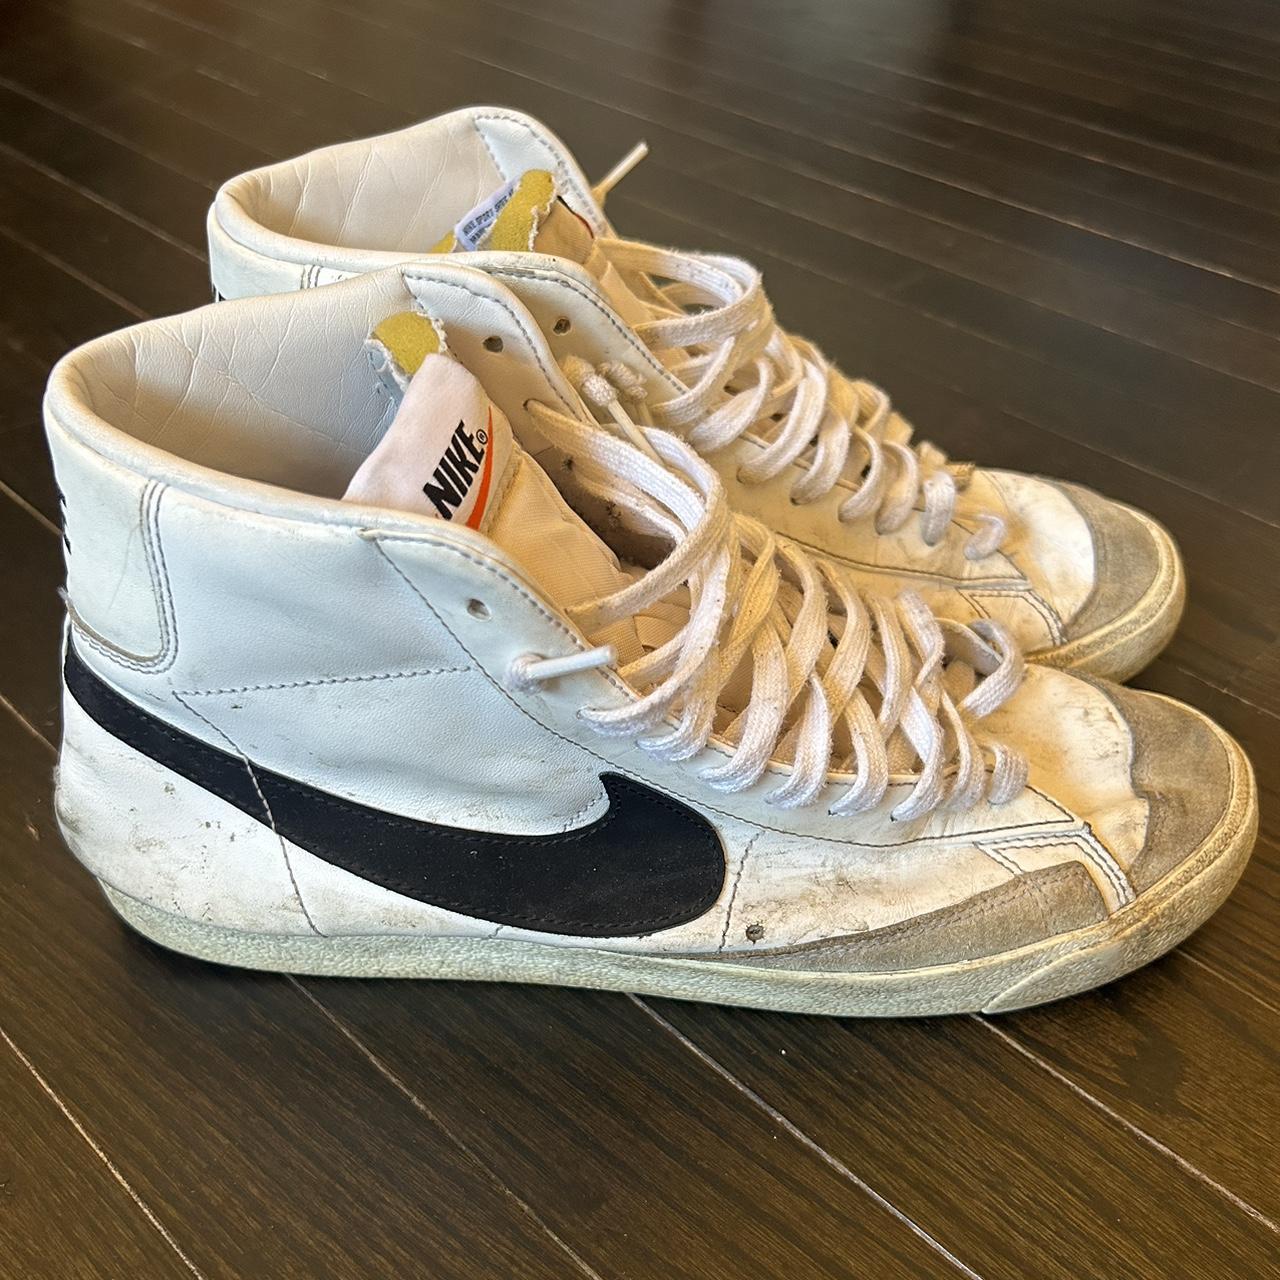 Nike Blazers men - could be washed in machine - Depop